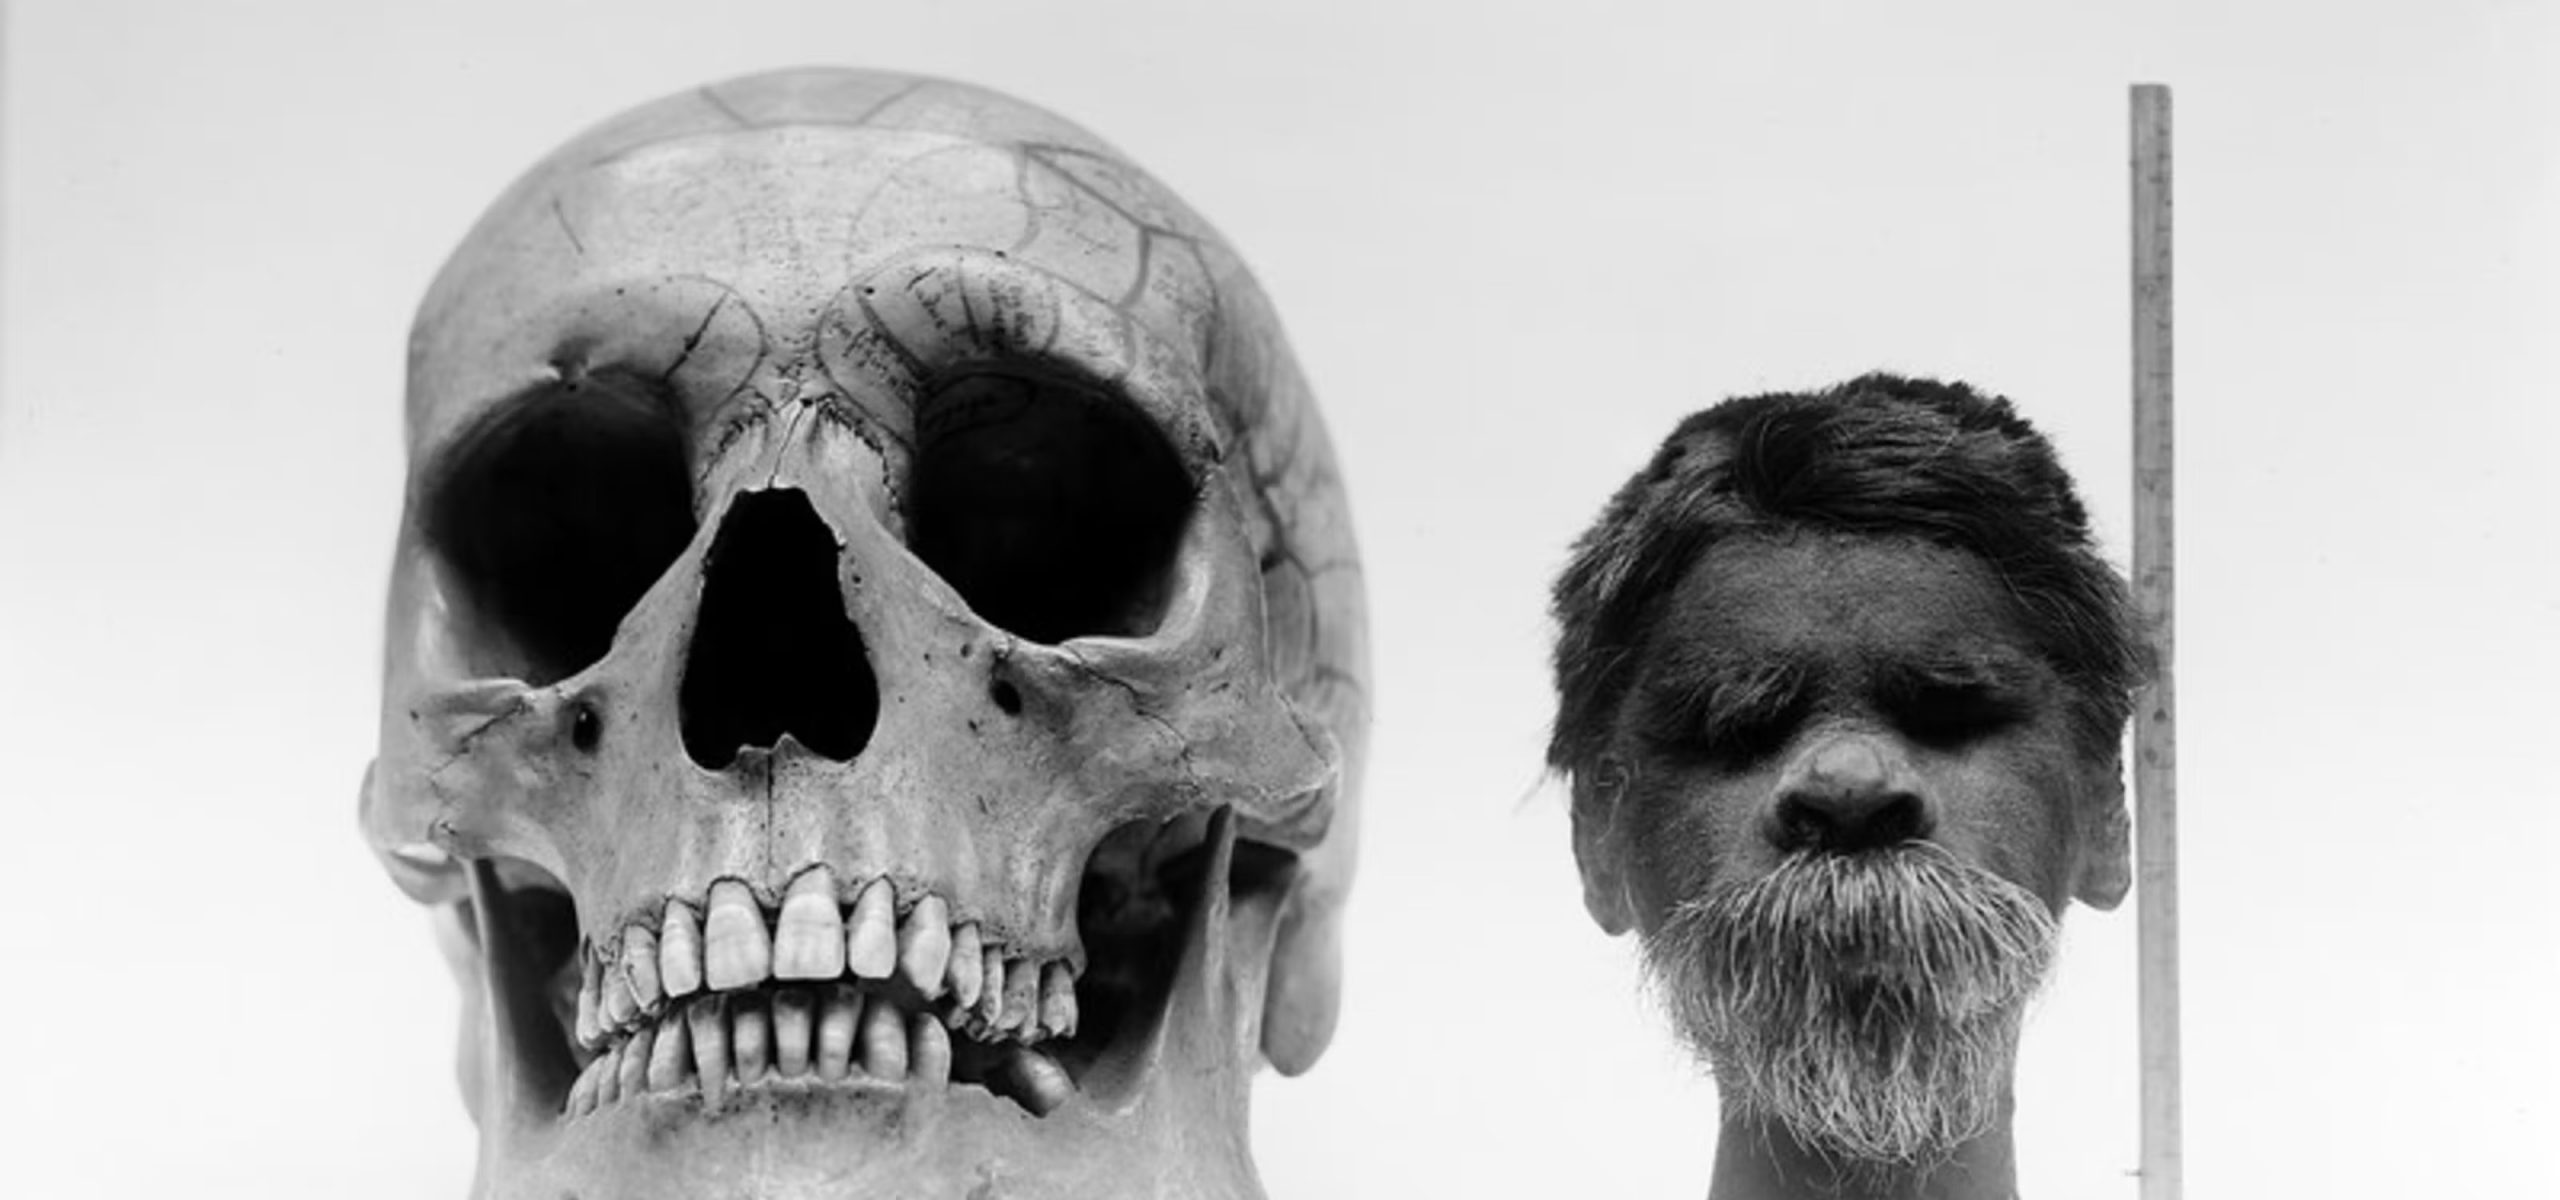 Shrunken head compared with normal skull